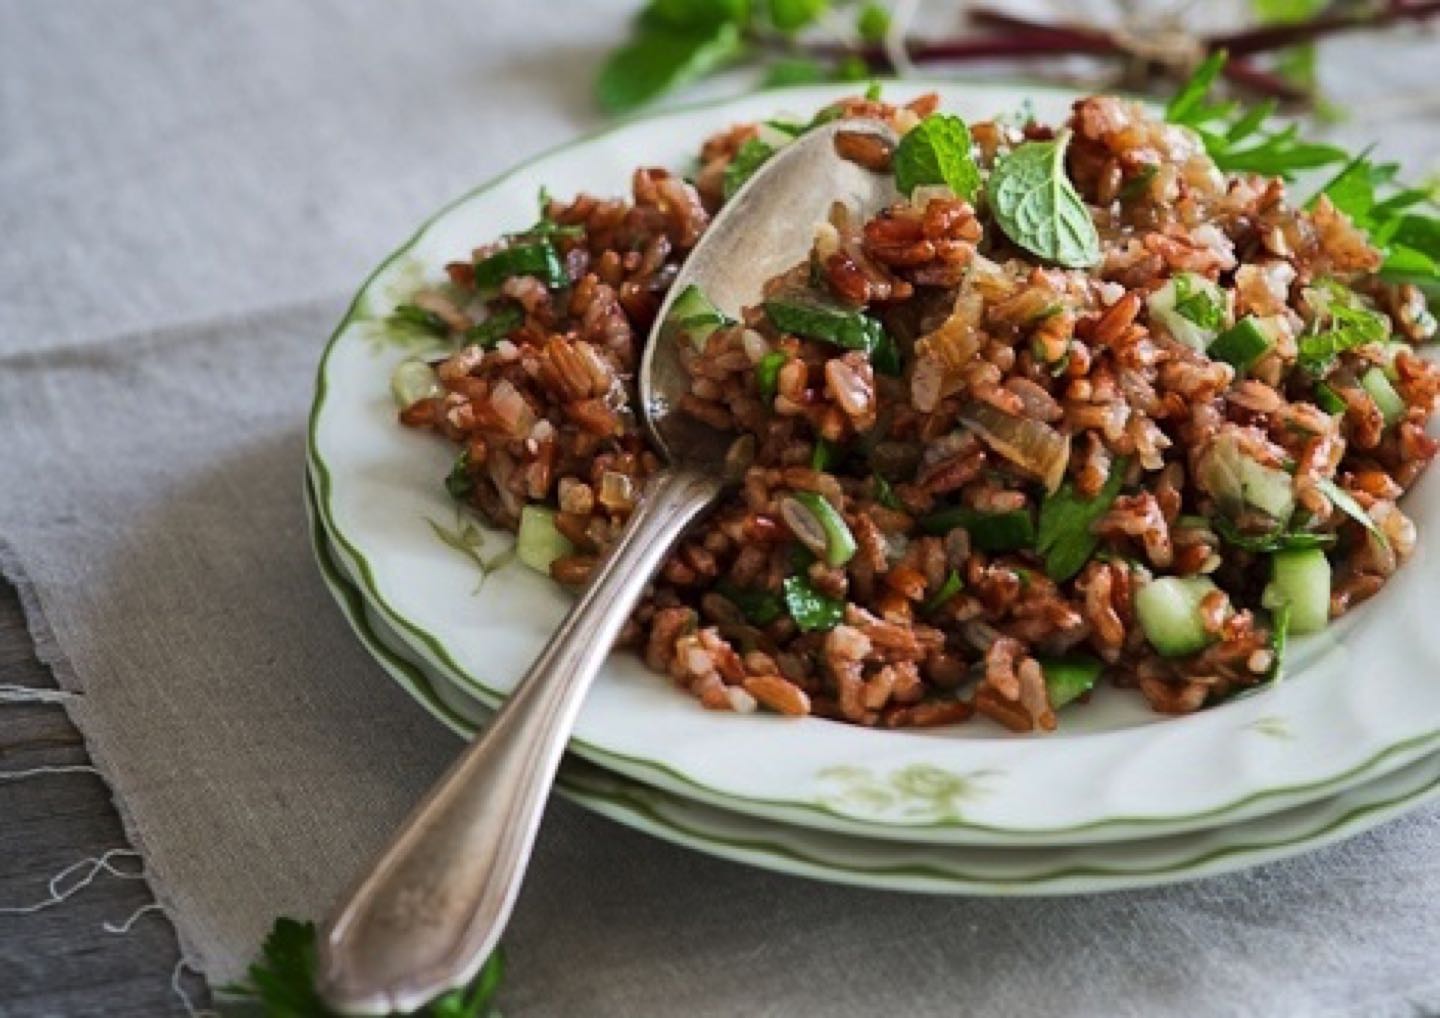 Health benefits from red rice in a healthy diet